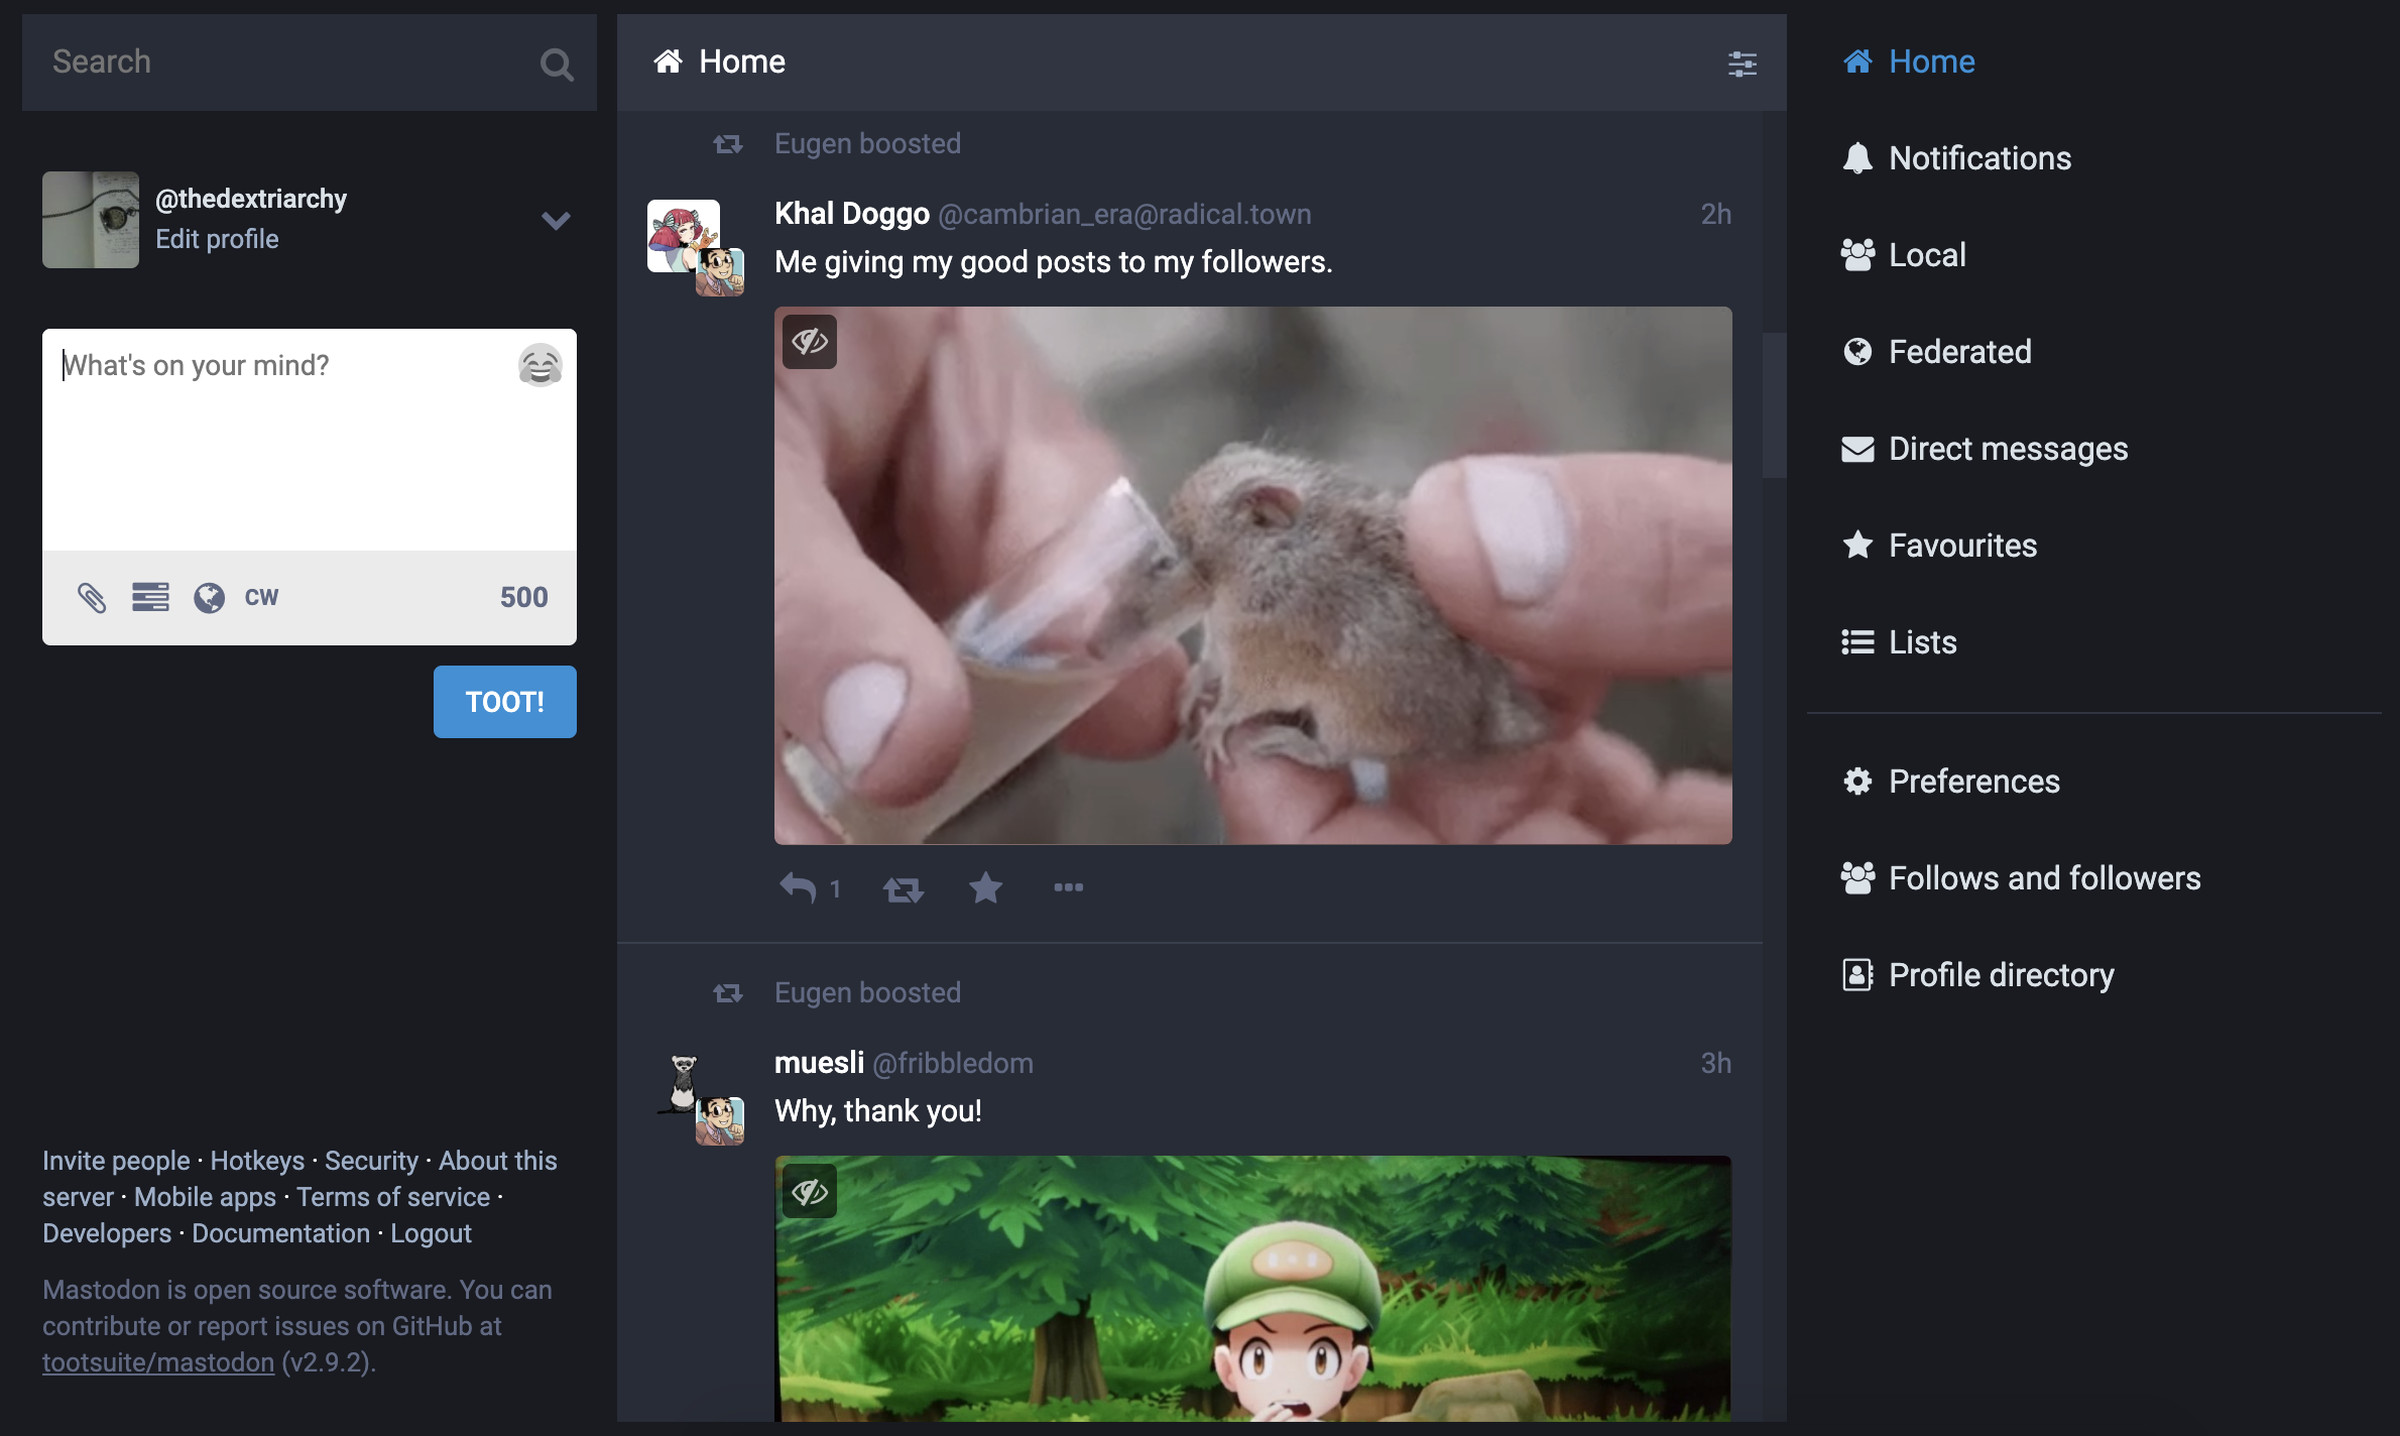 A screenshot from Mastodon.Social, showing the user interface